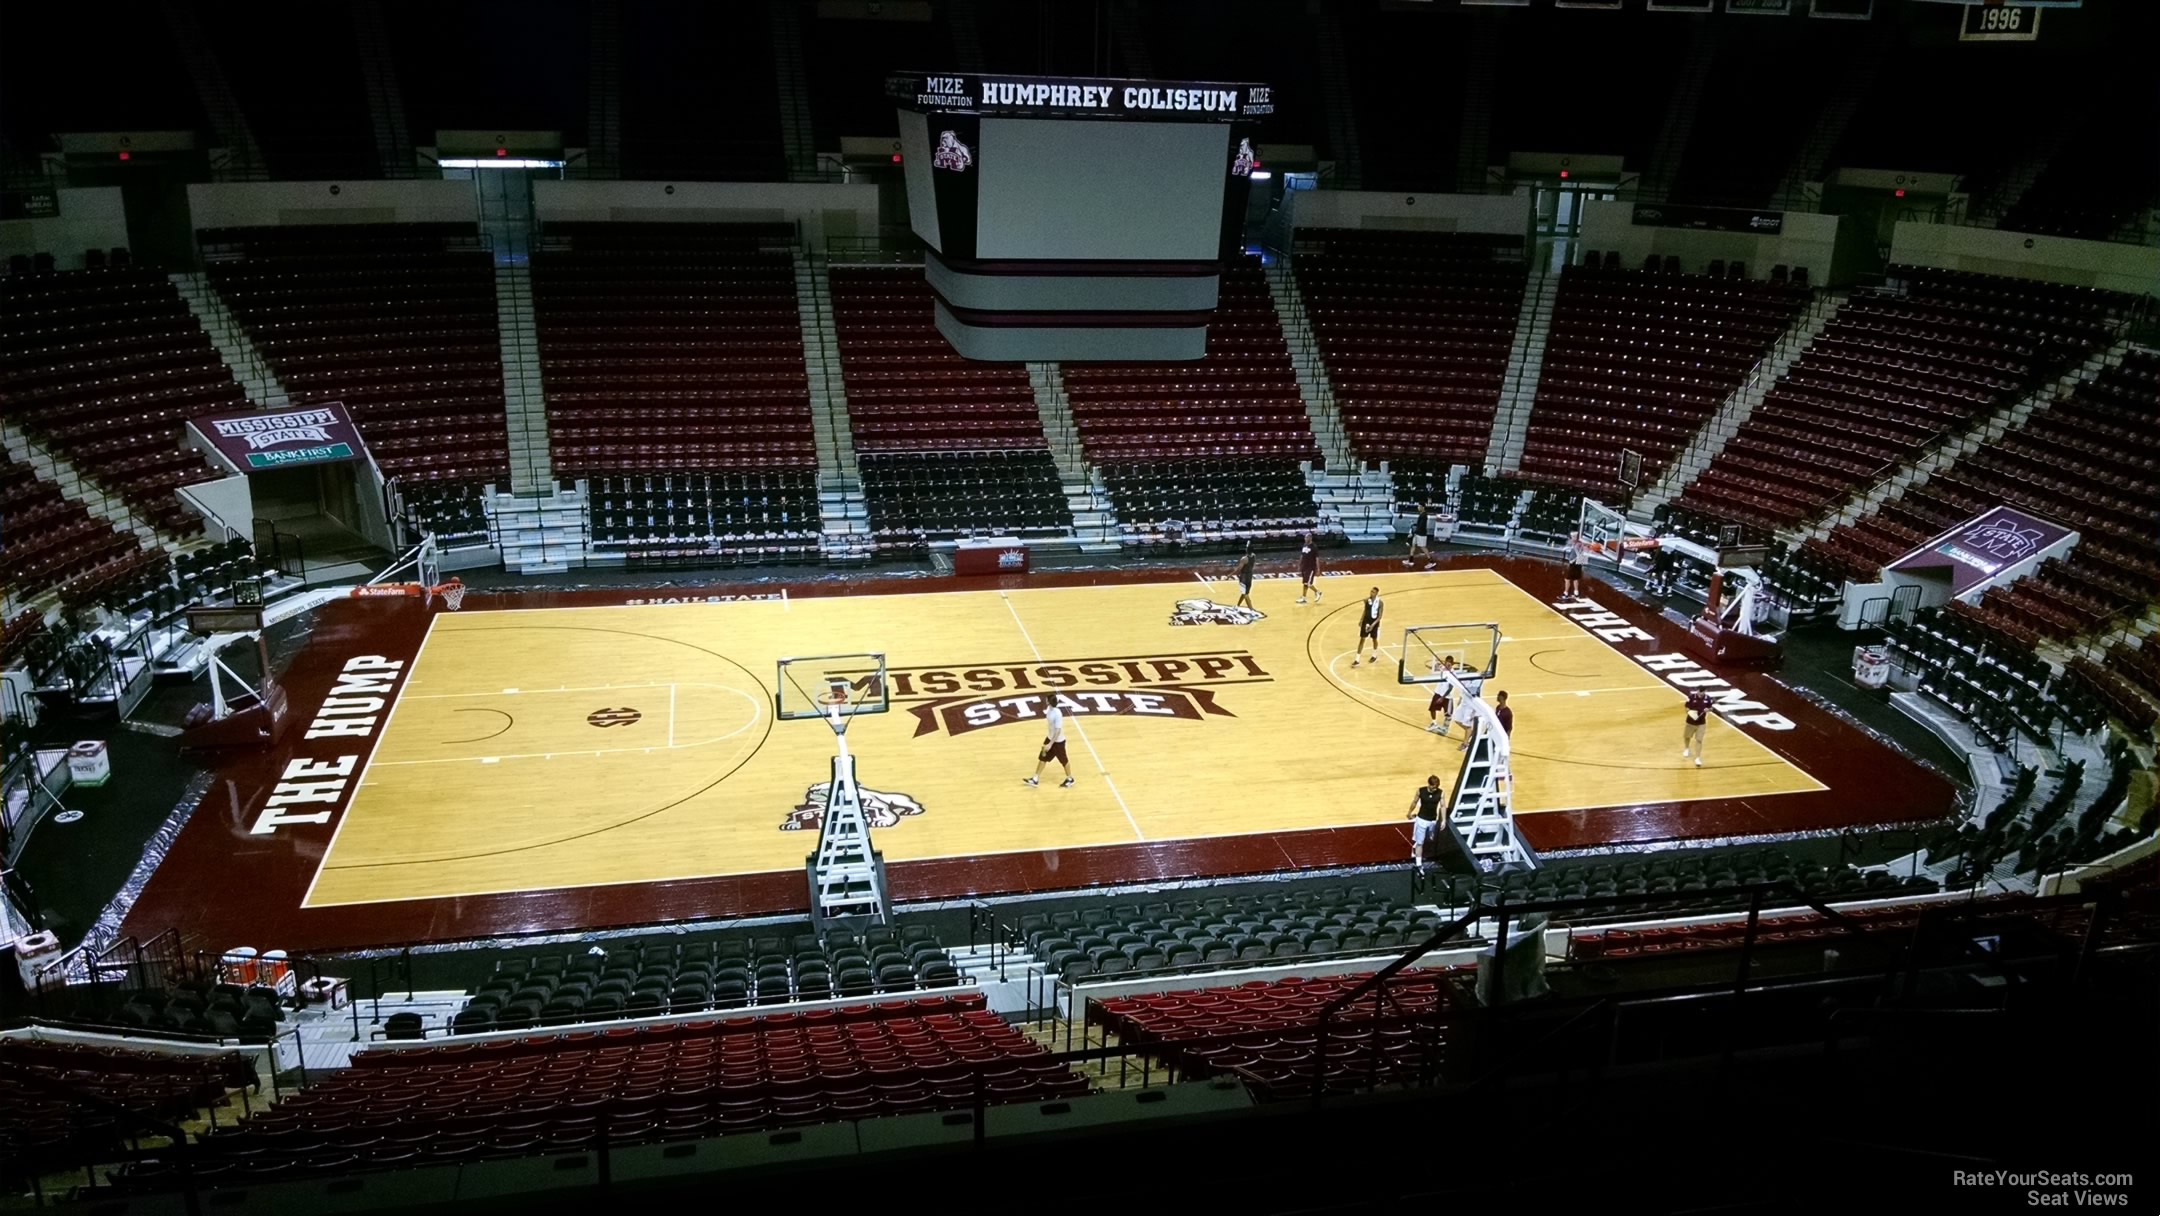 section 211, row 8 seat view  - humphrey coliseum